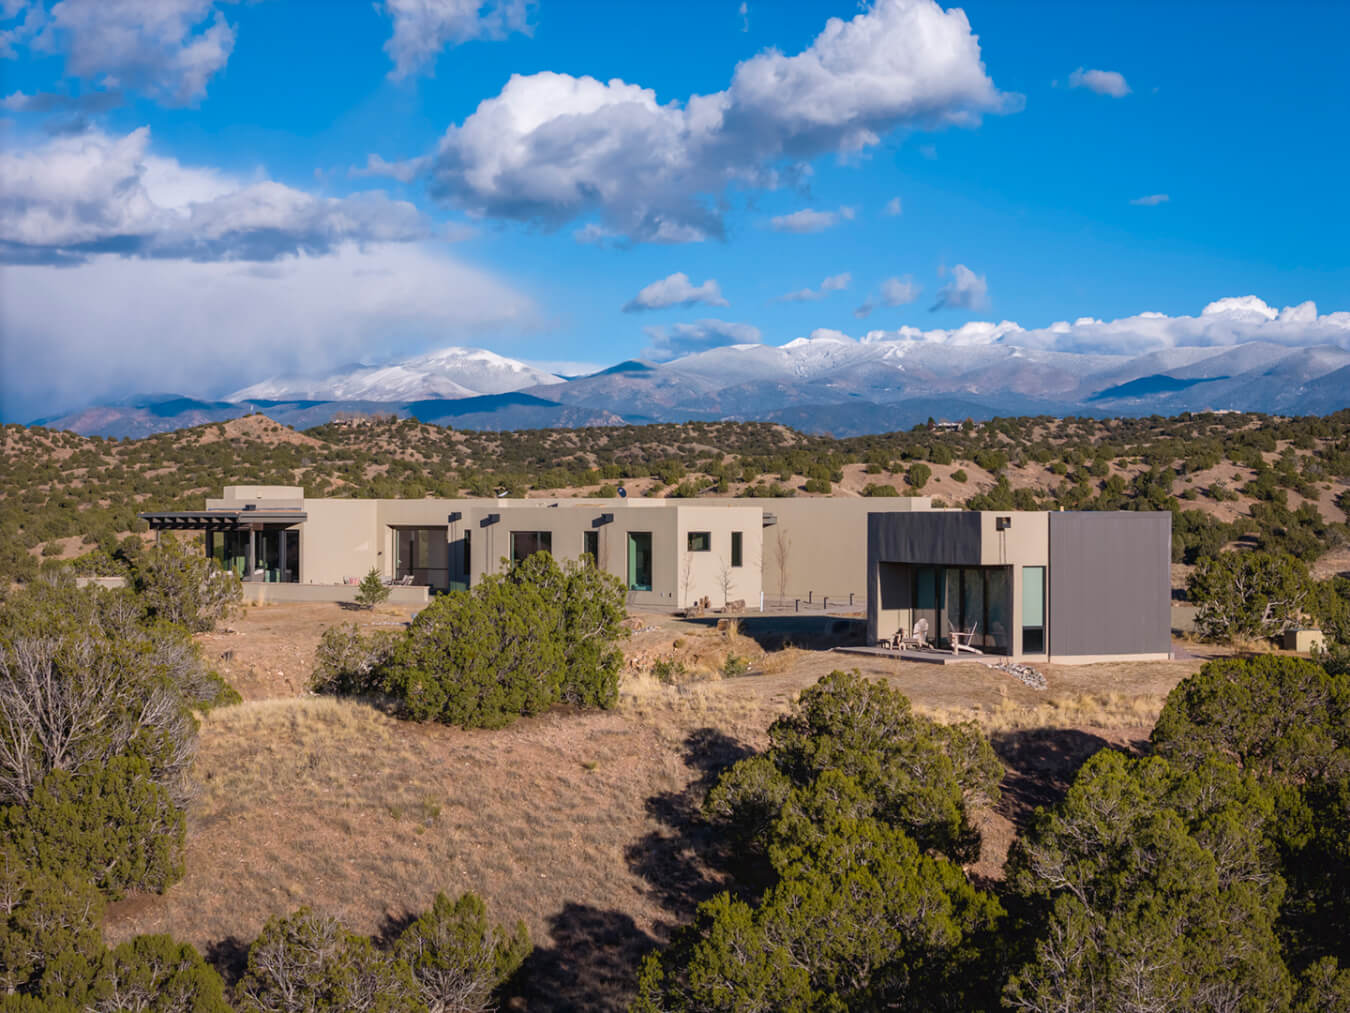 A Santa Fe-style home in the desert with mountains in the background, built by a skilled home builder.